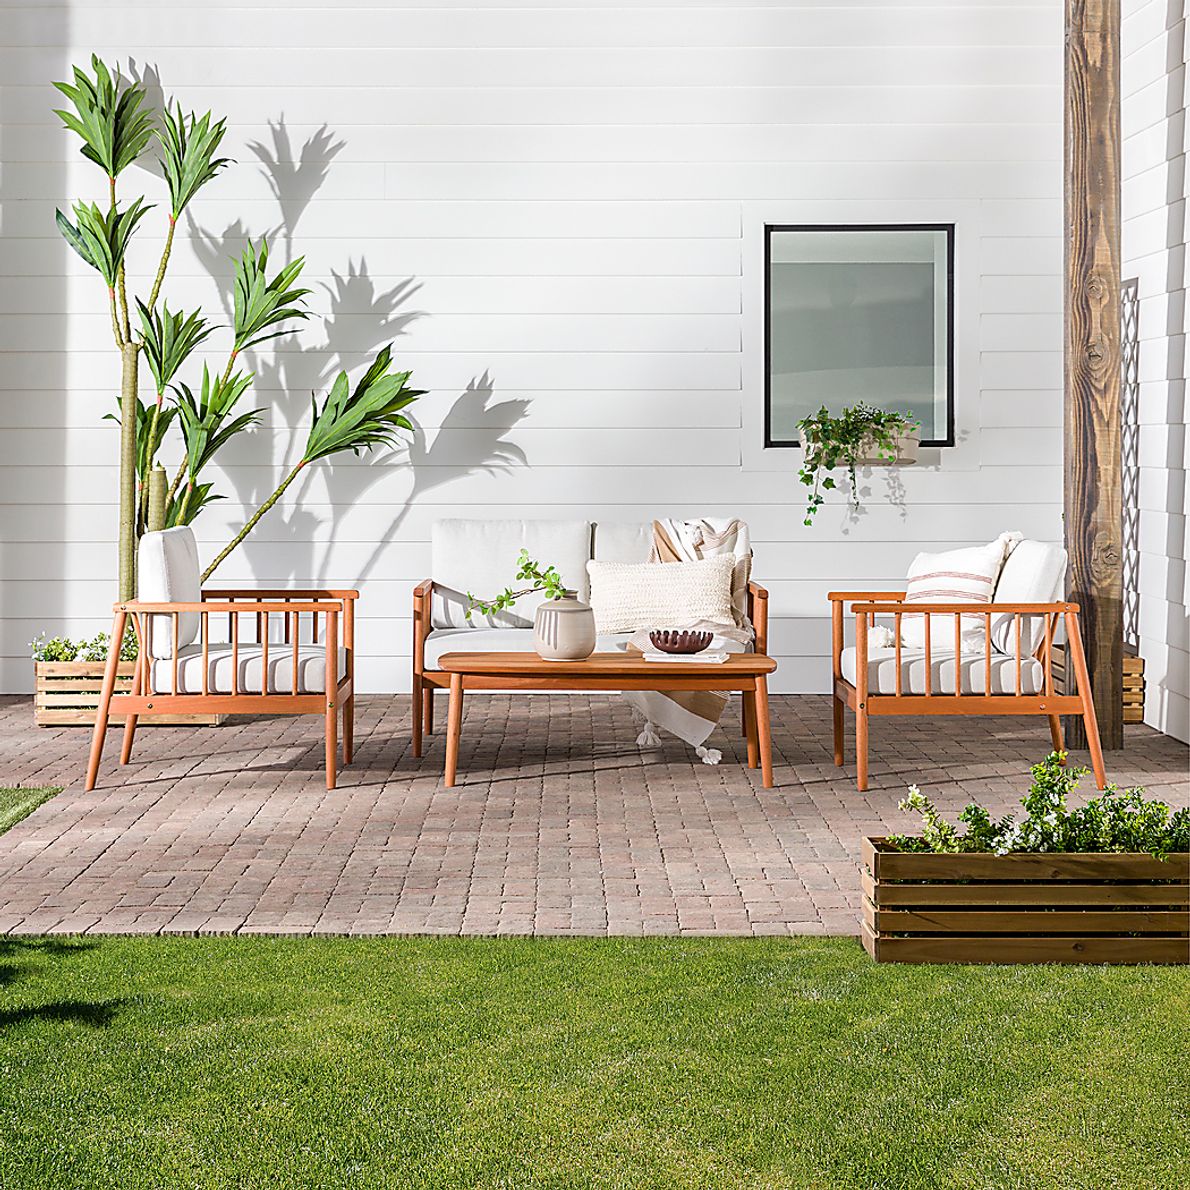 Outdoor Shellrich Coast Brown 4pc Chat Set